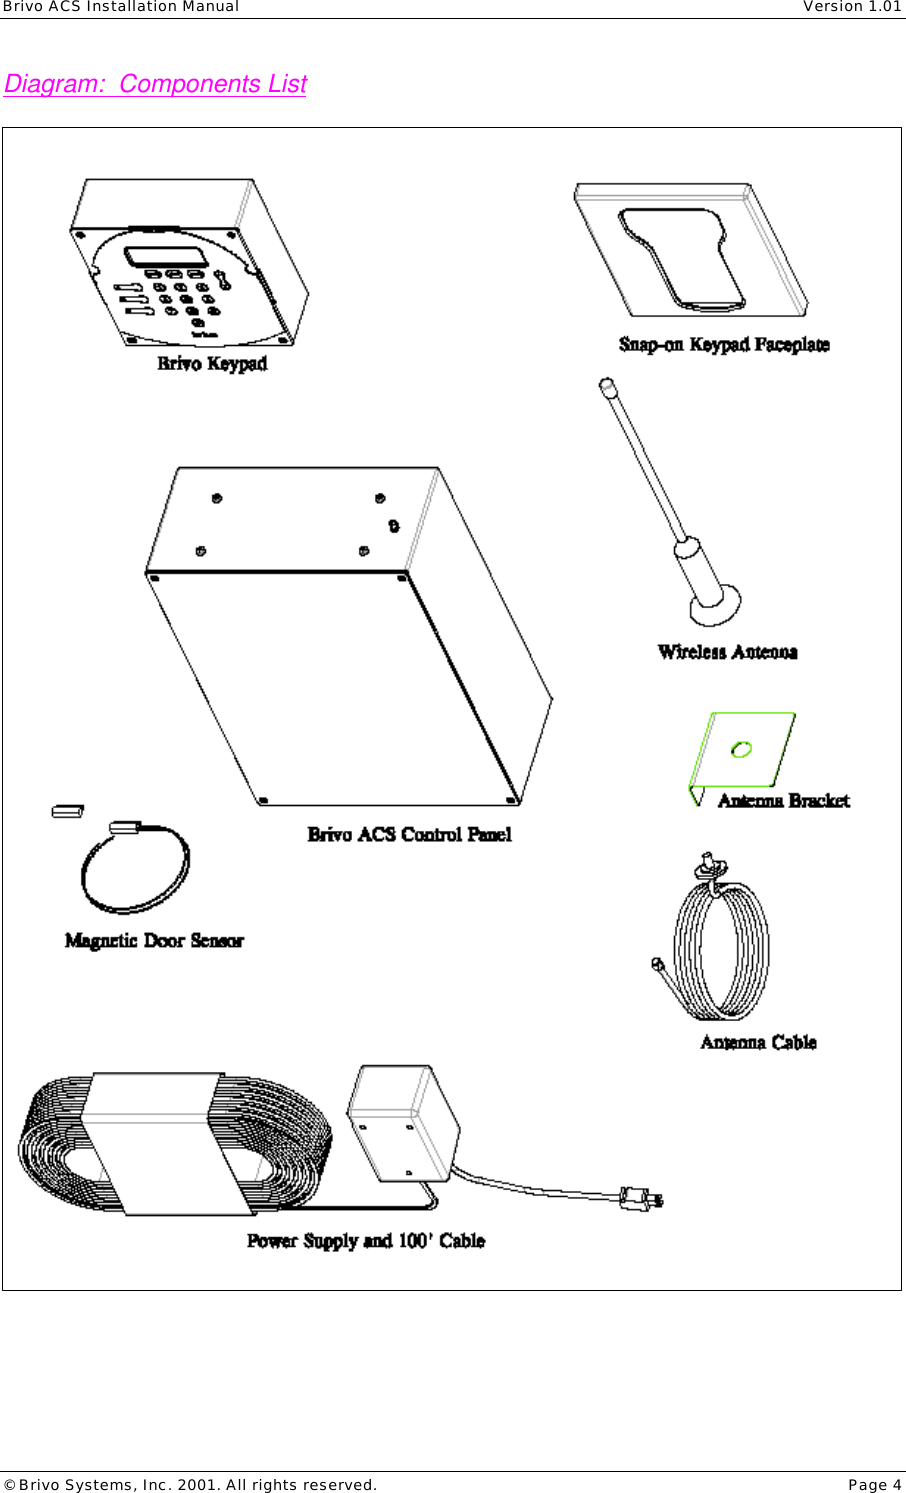 Brivo ACS Installation Manual    Version 1.01 © Brivo Systems, Inc. 2001. All rights reserved.    Page 4 Diagram:  Components List  